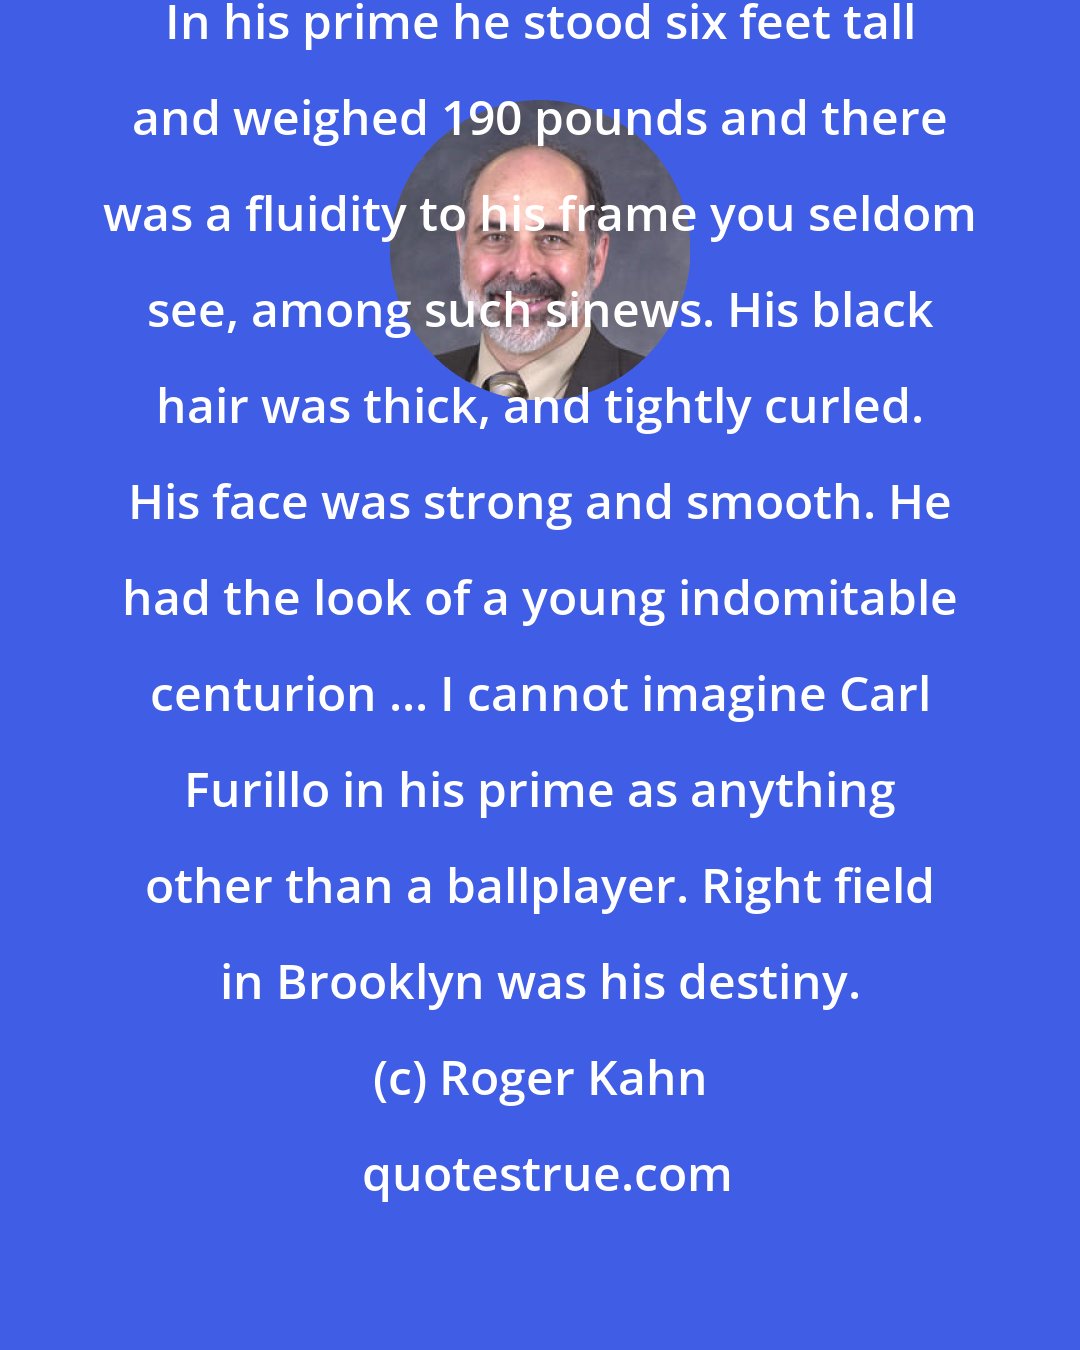 Roger Kahn: Carl Furillo was pure ballplayer. In his prime he stood six feet tall and weighed 190 pounds and there was a fluidity to his frame you seldom see, among such sinews. His black hair was thick, and tightly curled. His face was strong and smooth. He had the look of a young indomitable centurion ... I cannot imagine Carl Furillo in his prime as anything other than a ballplayer. Right field in Brooklyn was his destiny.